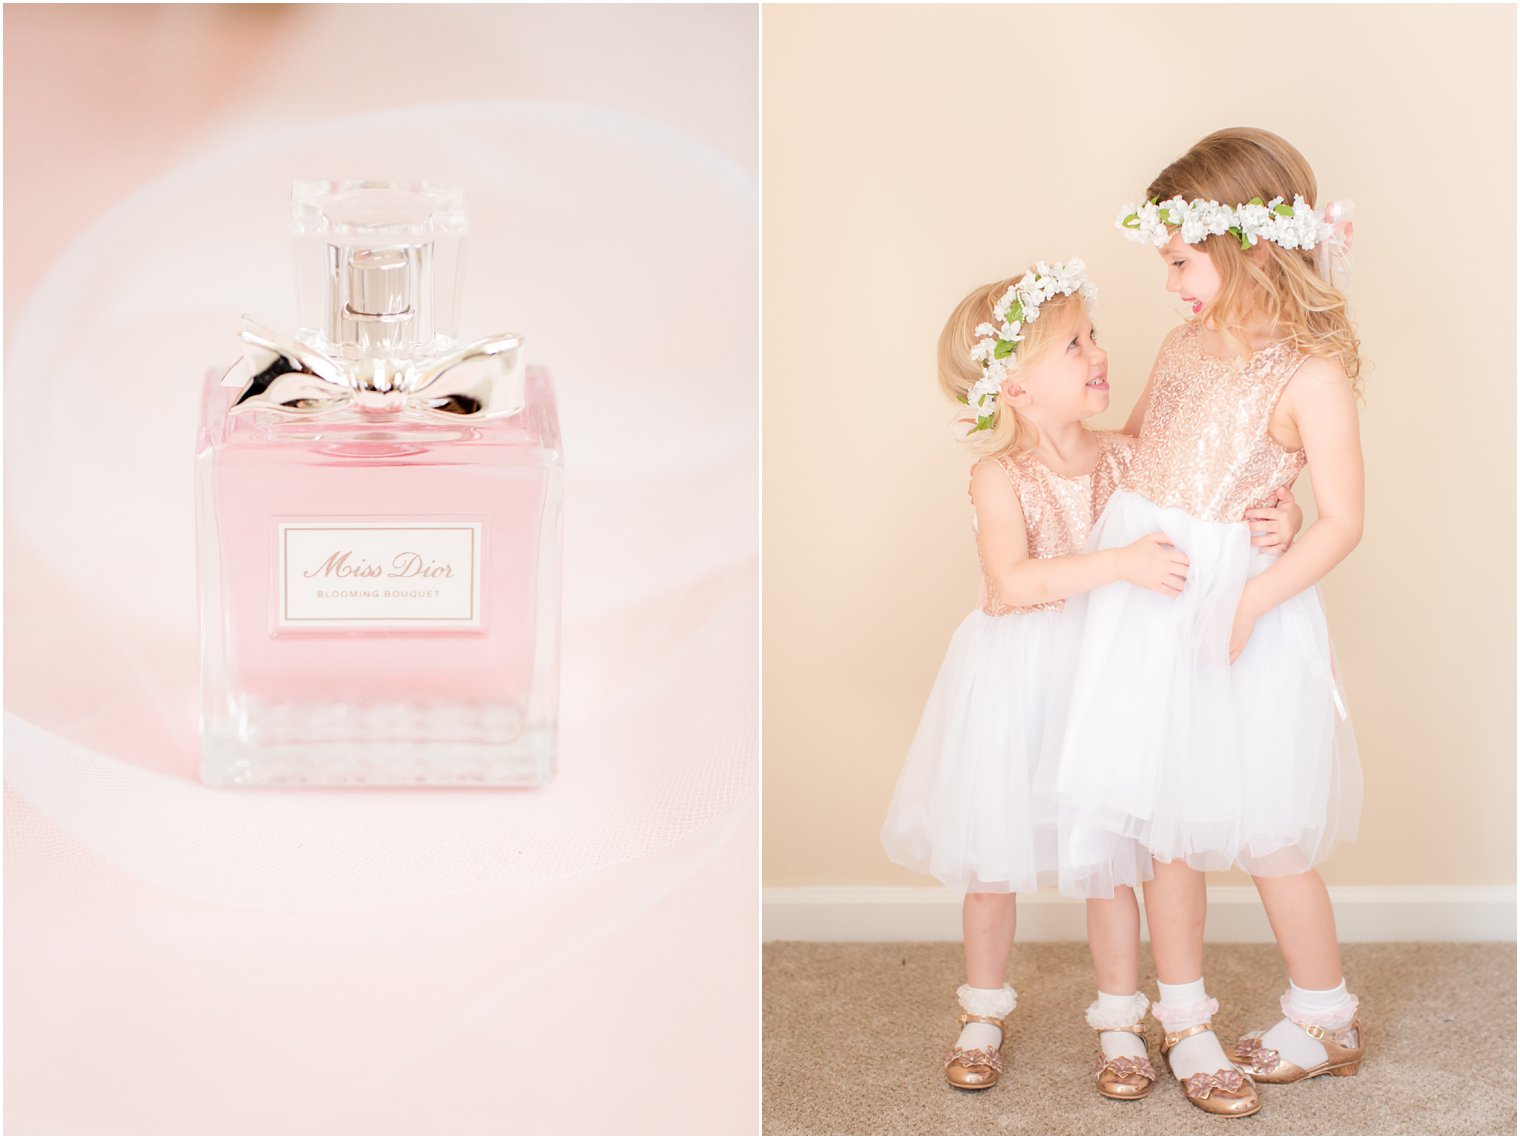 miss dior perfume and flower girls